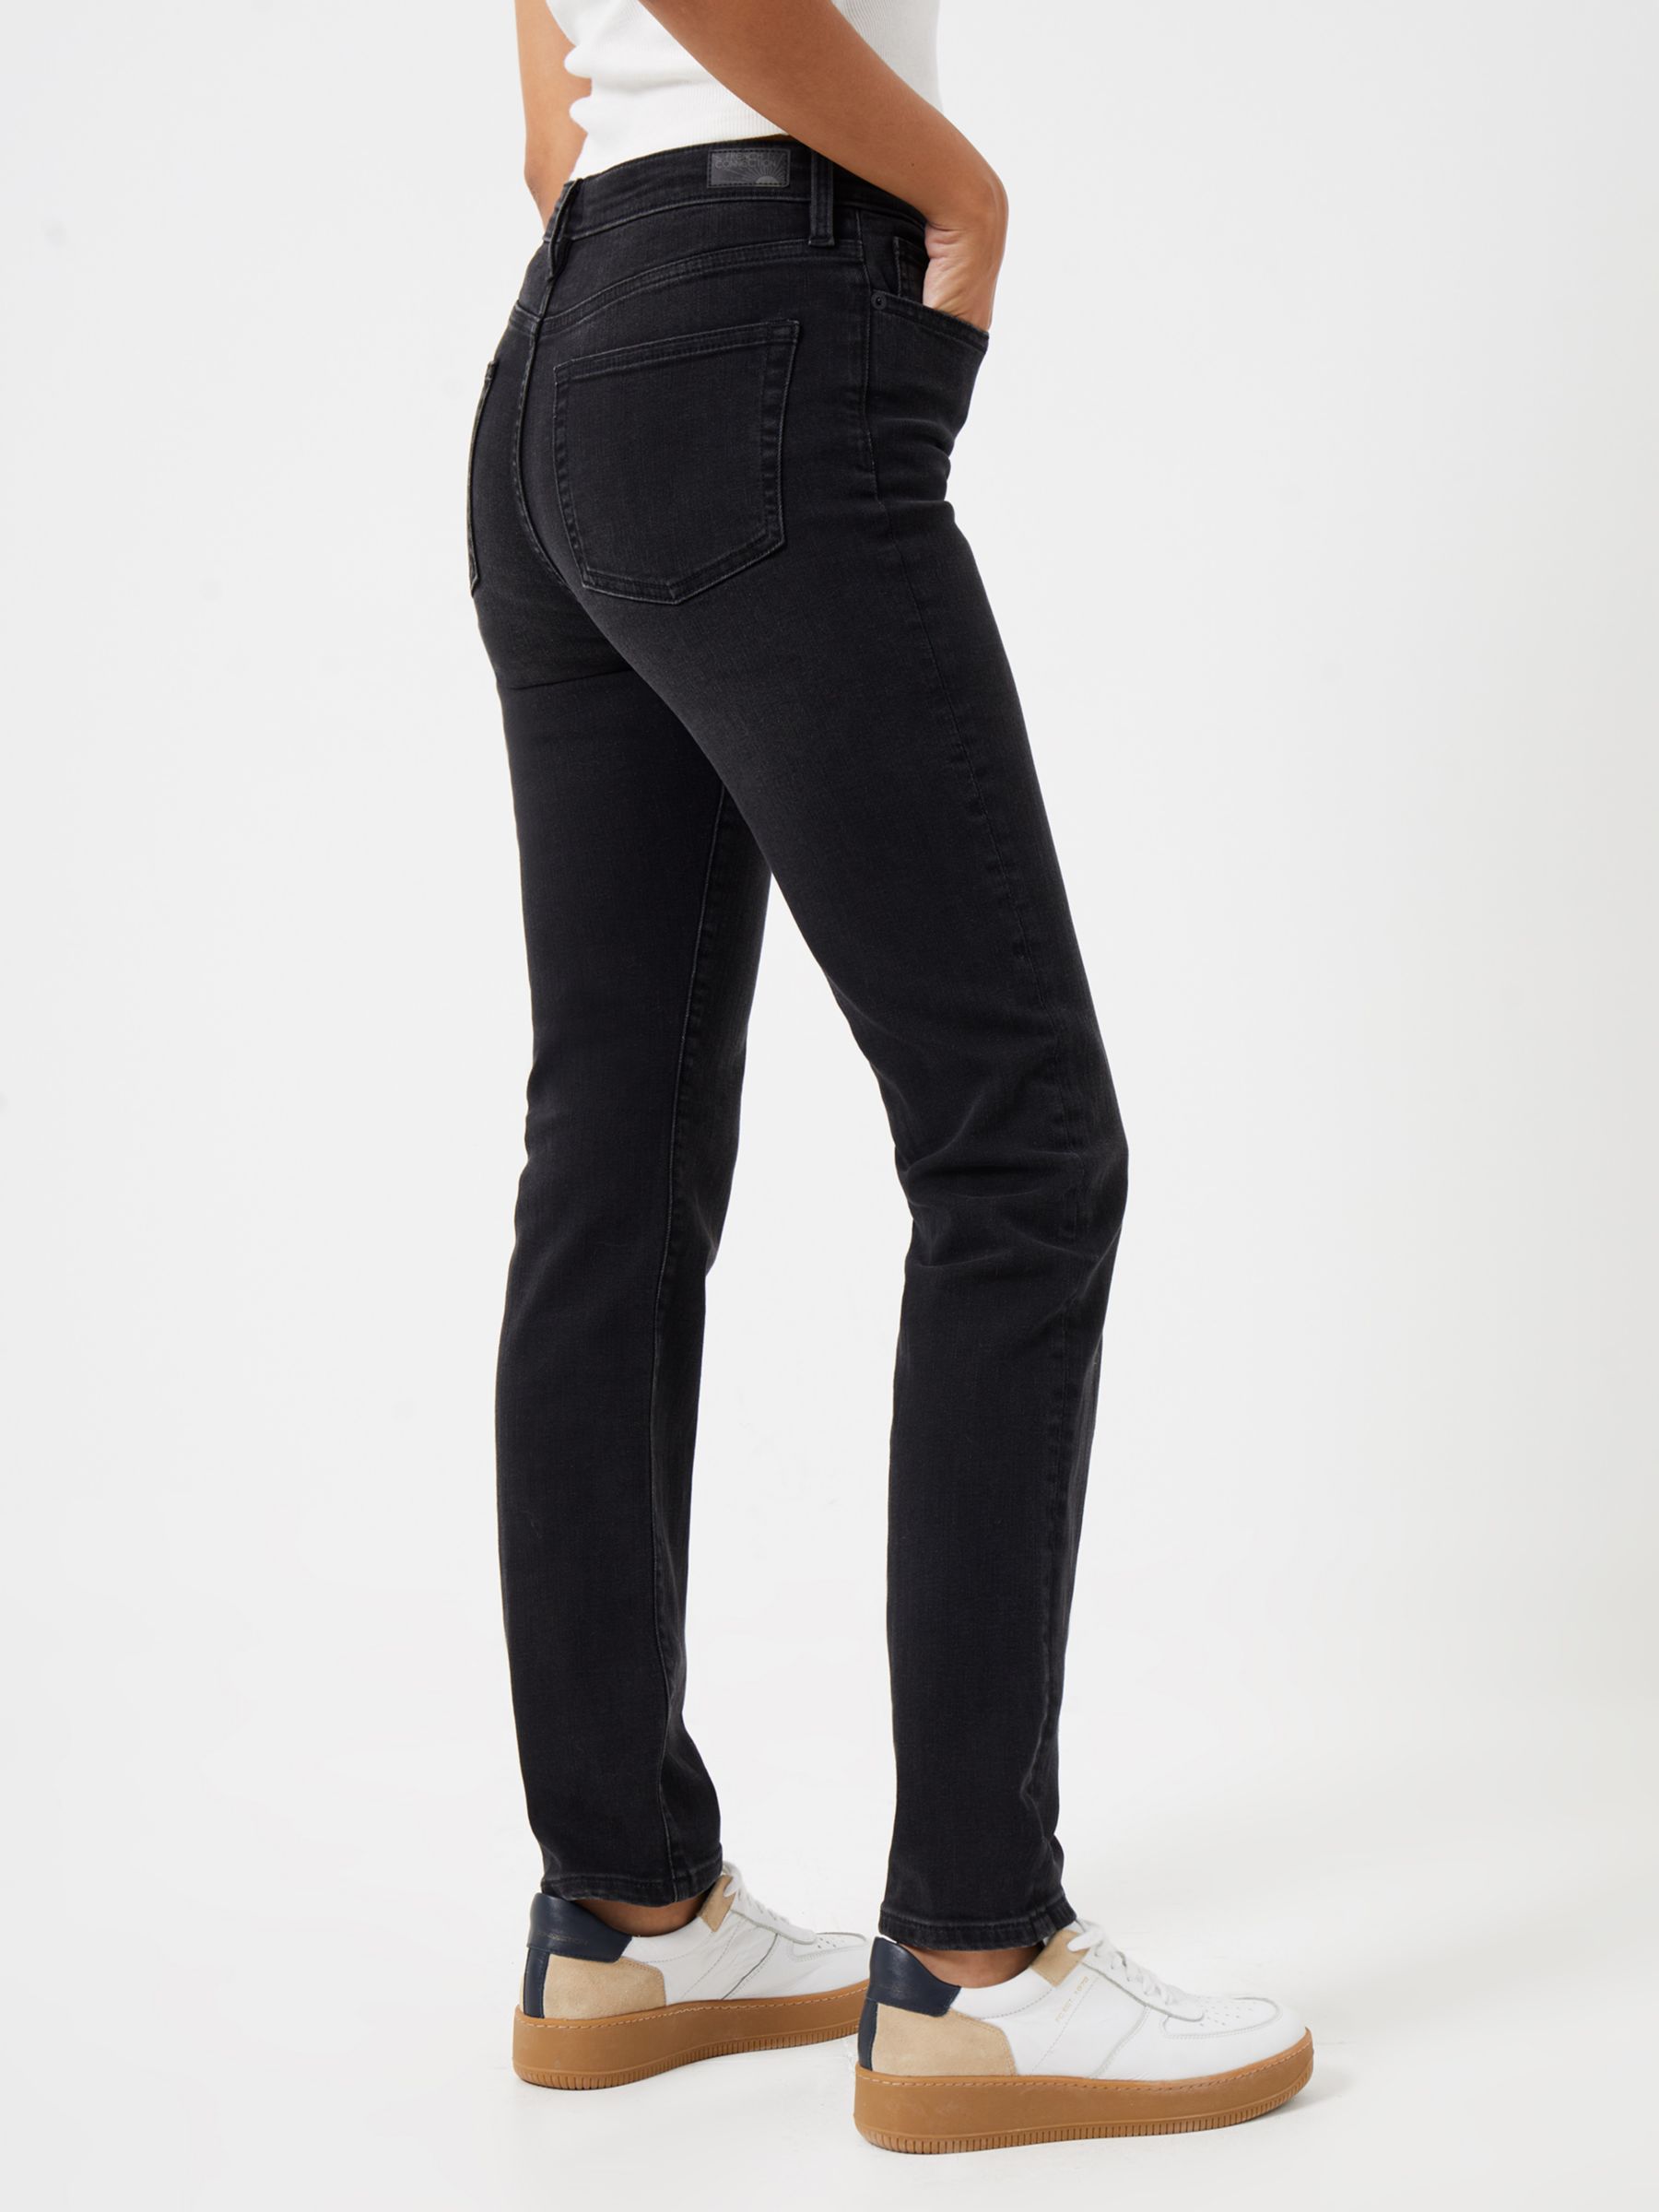 French Connection Stretch Slim Jeans, Black, Black, 8